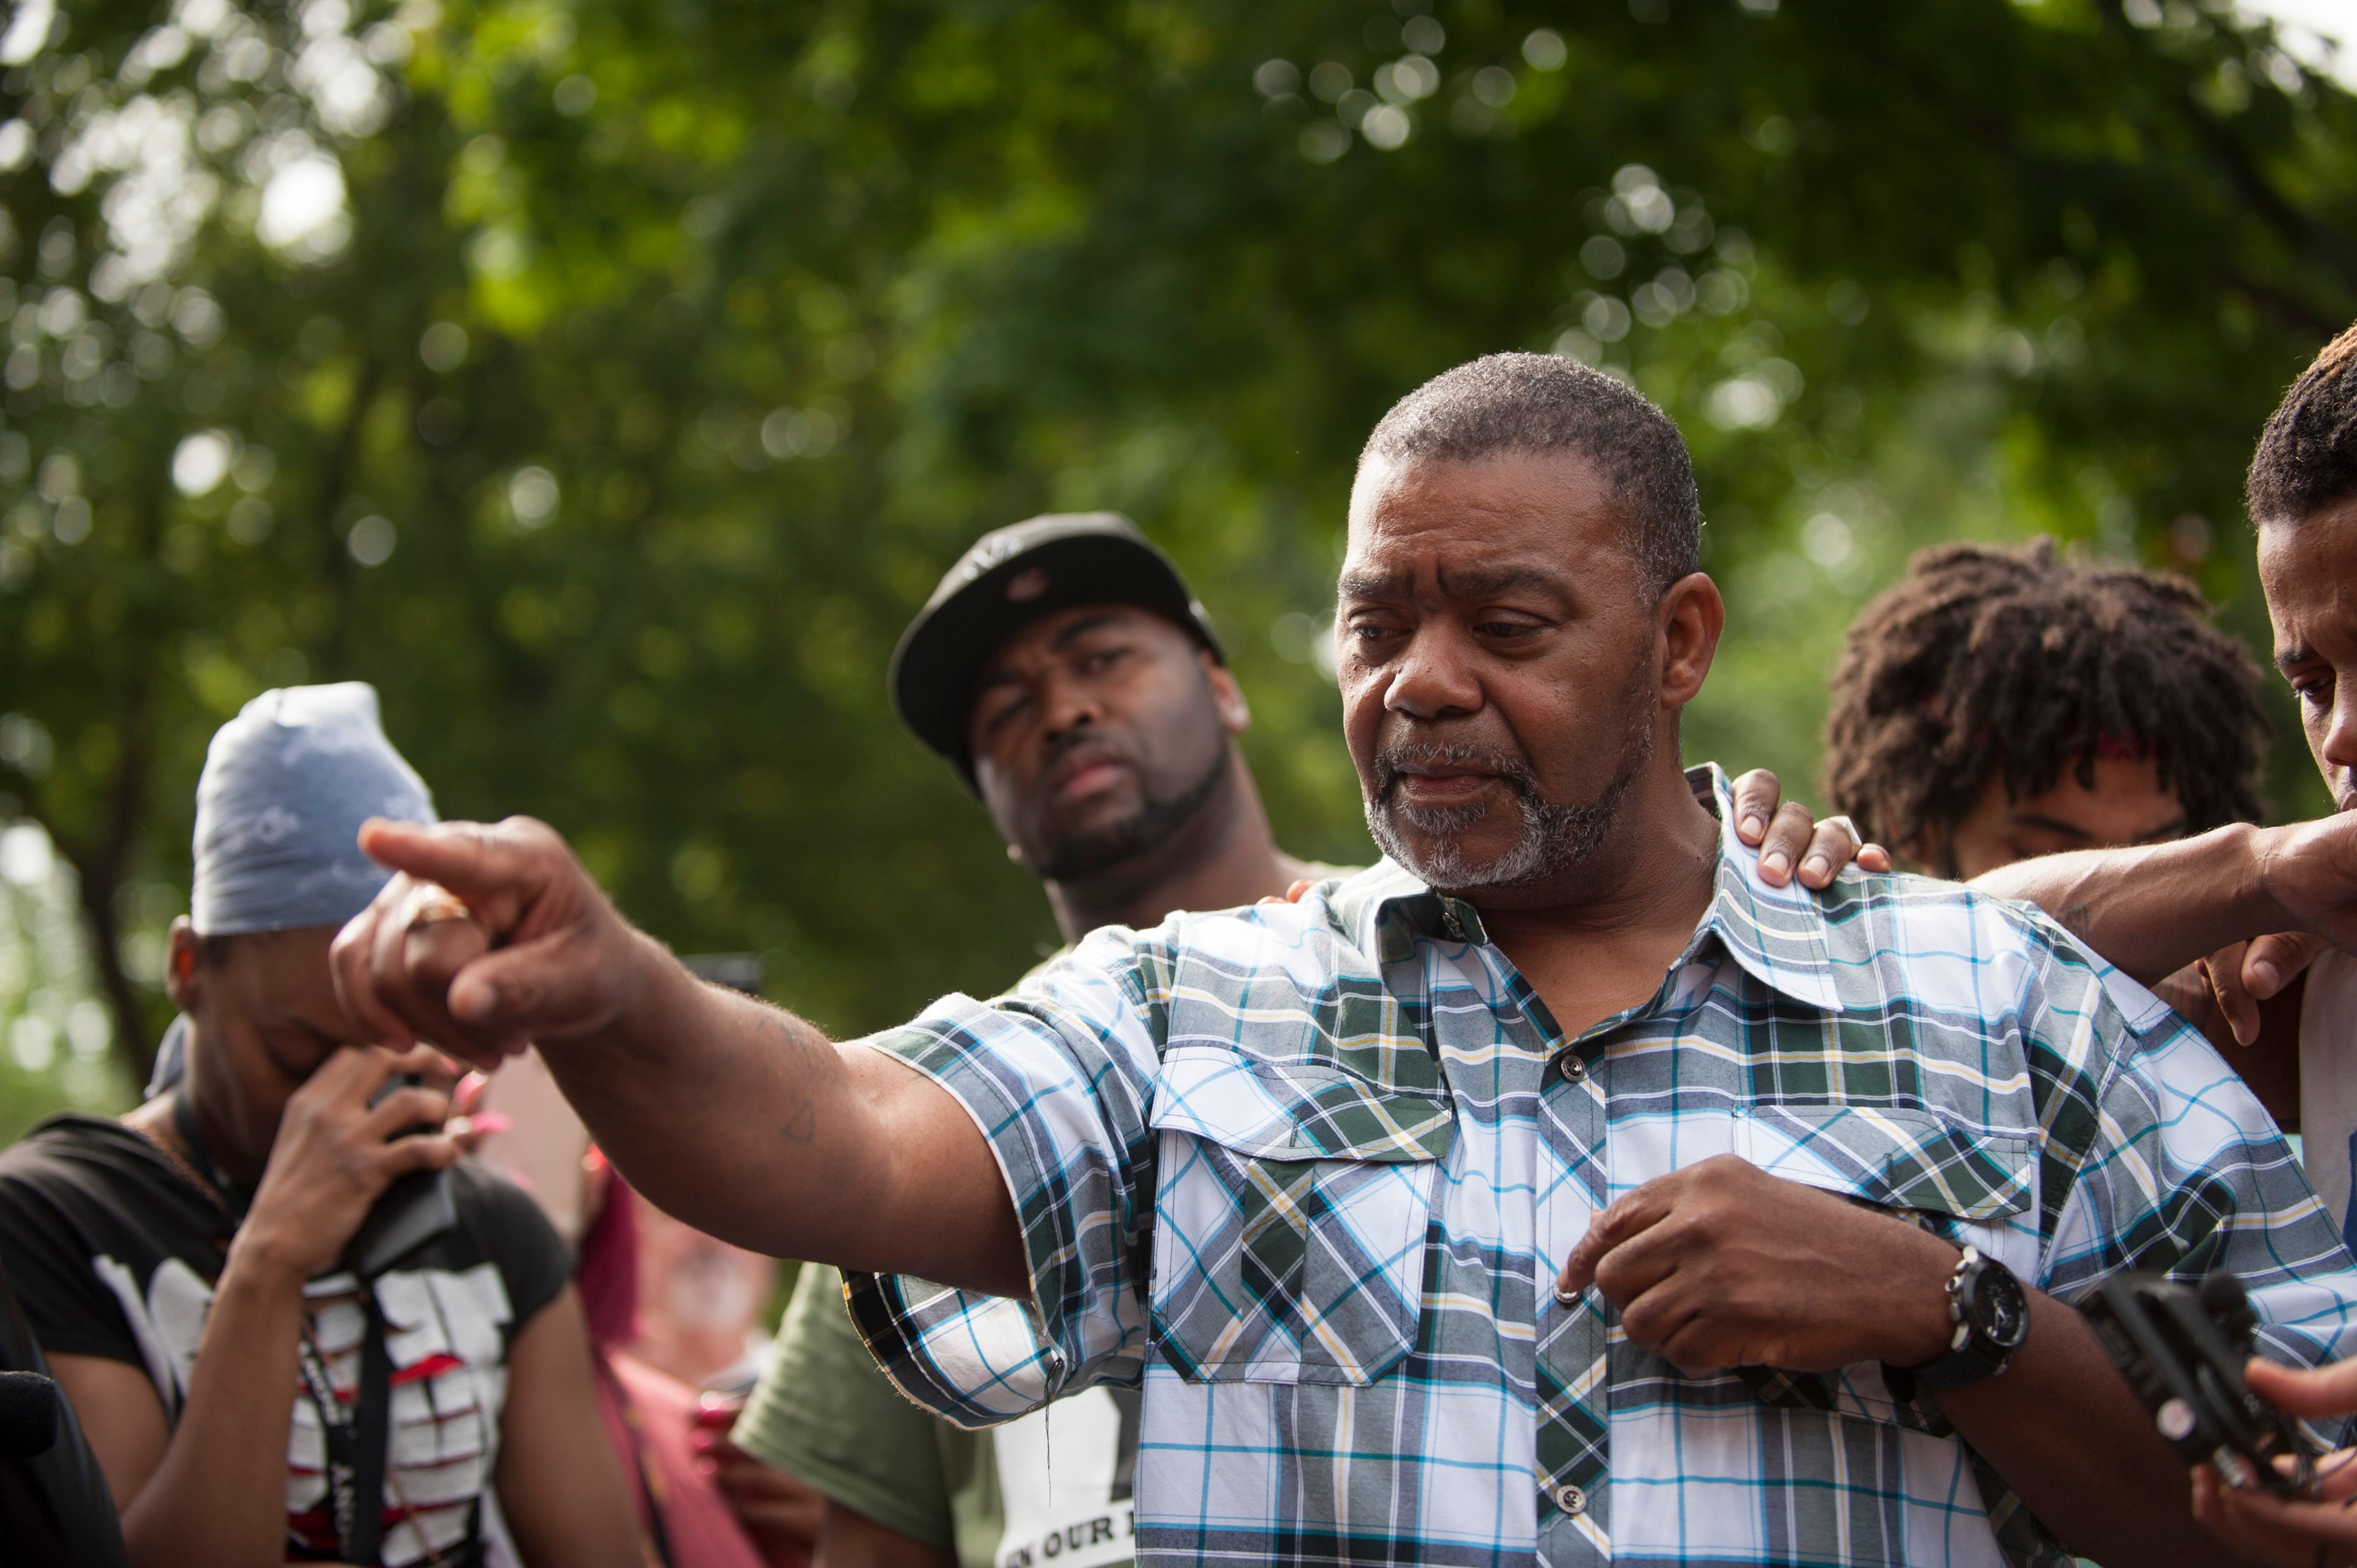 Clarence D. Castile, uncle of Philando Castile, speaks outside the Governor's Mansion on July 7, 2016 in St. Paul, Minnesota.